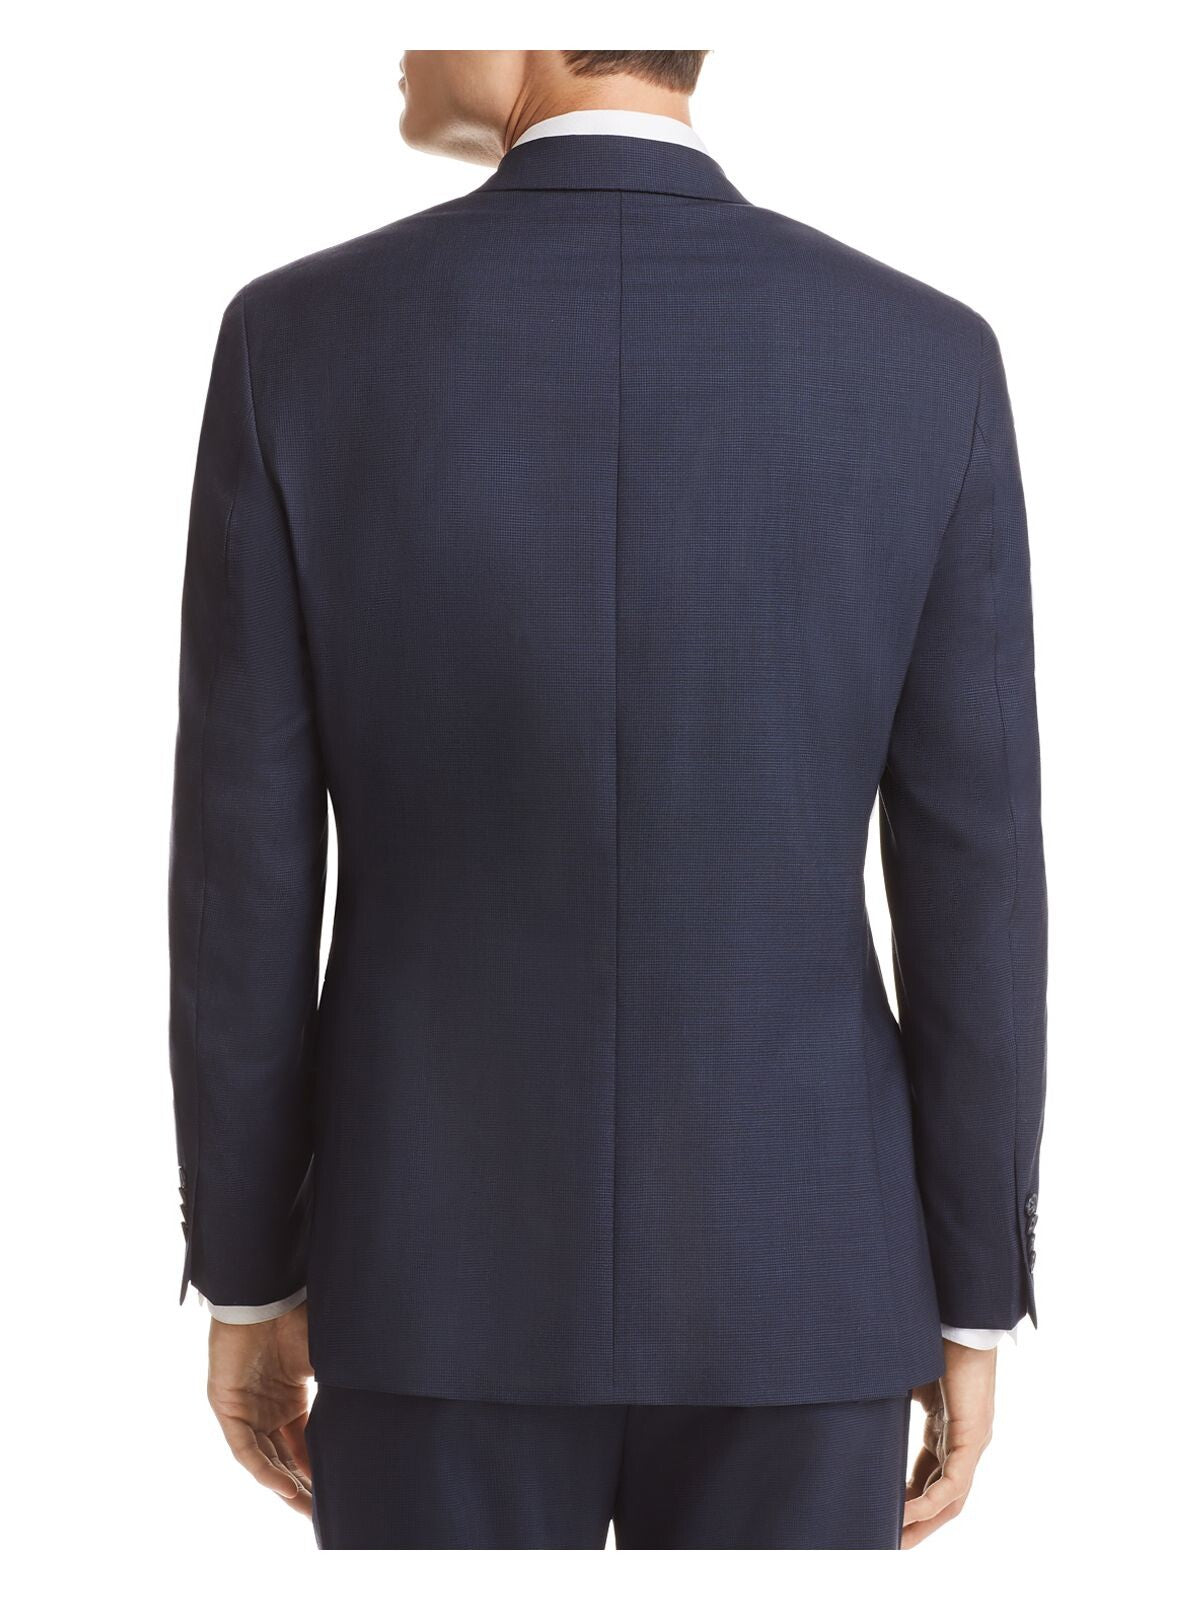 MICHAEL KORS Mens Navy Single Breasted, Stretch, Classic Fit Wool Blend Suit Separate Blazer Jacket 36